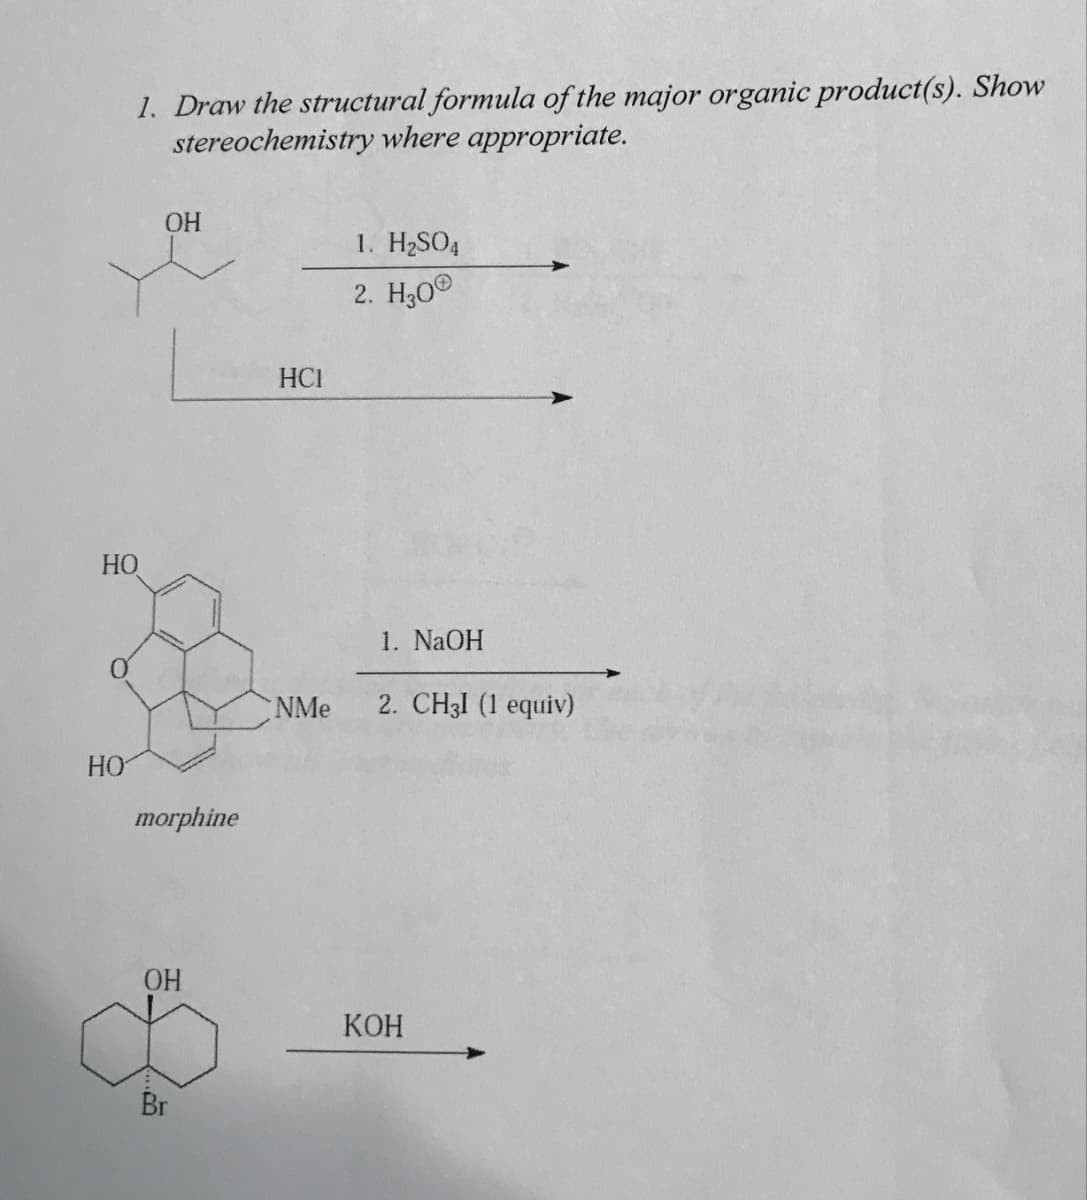 НО
HO
1. Draw the structural formula of the major organic product(s). Show
stereochemistry where appropriate.
ОН
morphine
ОН
ба
Br
HCI
NMe
1. H2SO4
2. Н30
1. NaOH
2. CH3 (1 equiv)
КОН